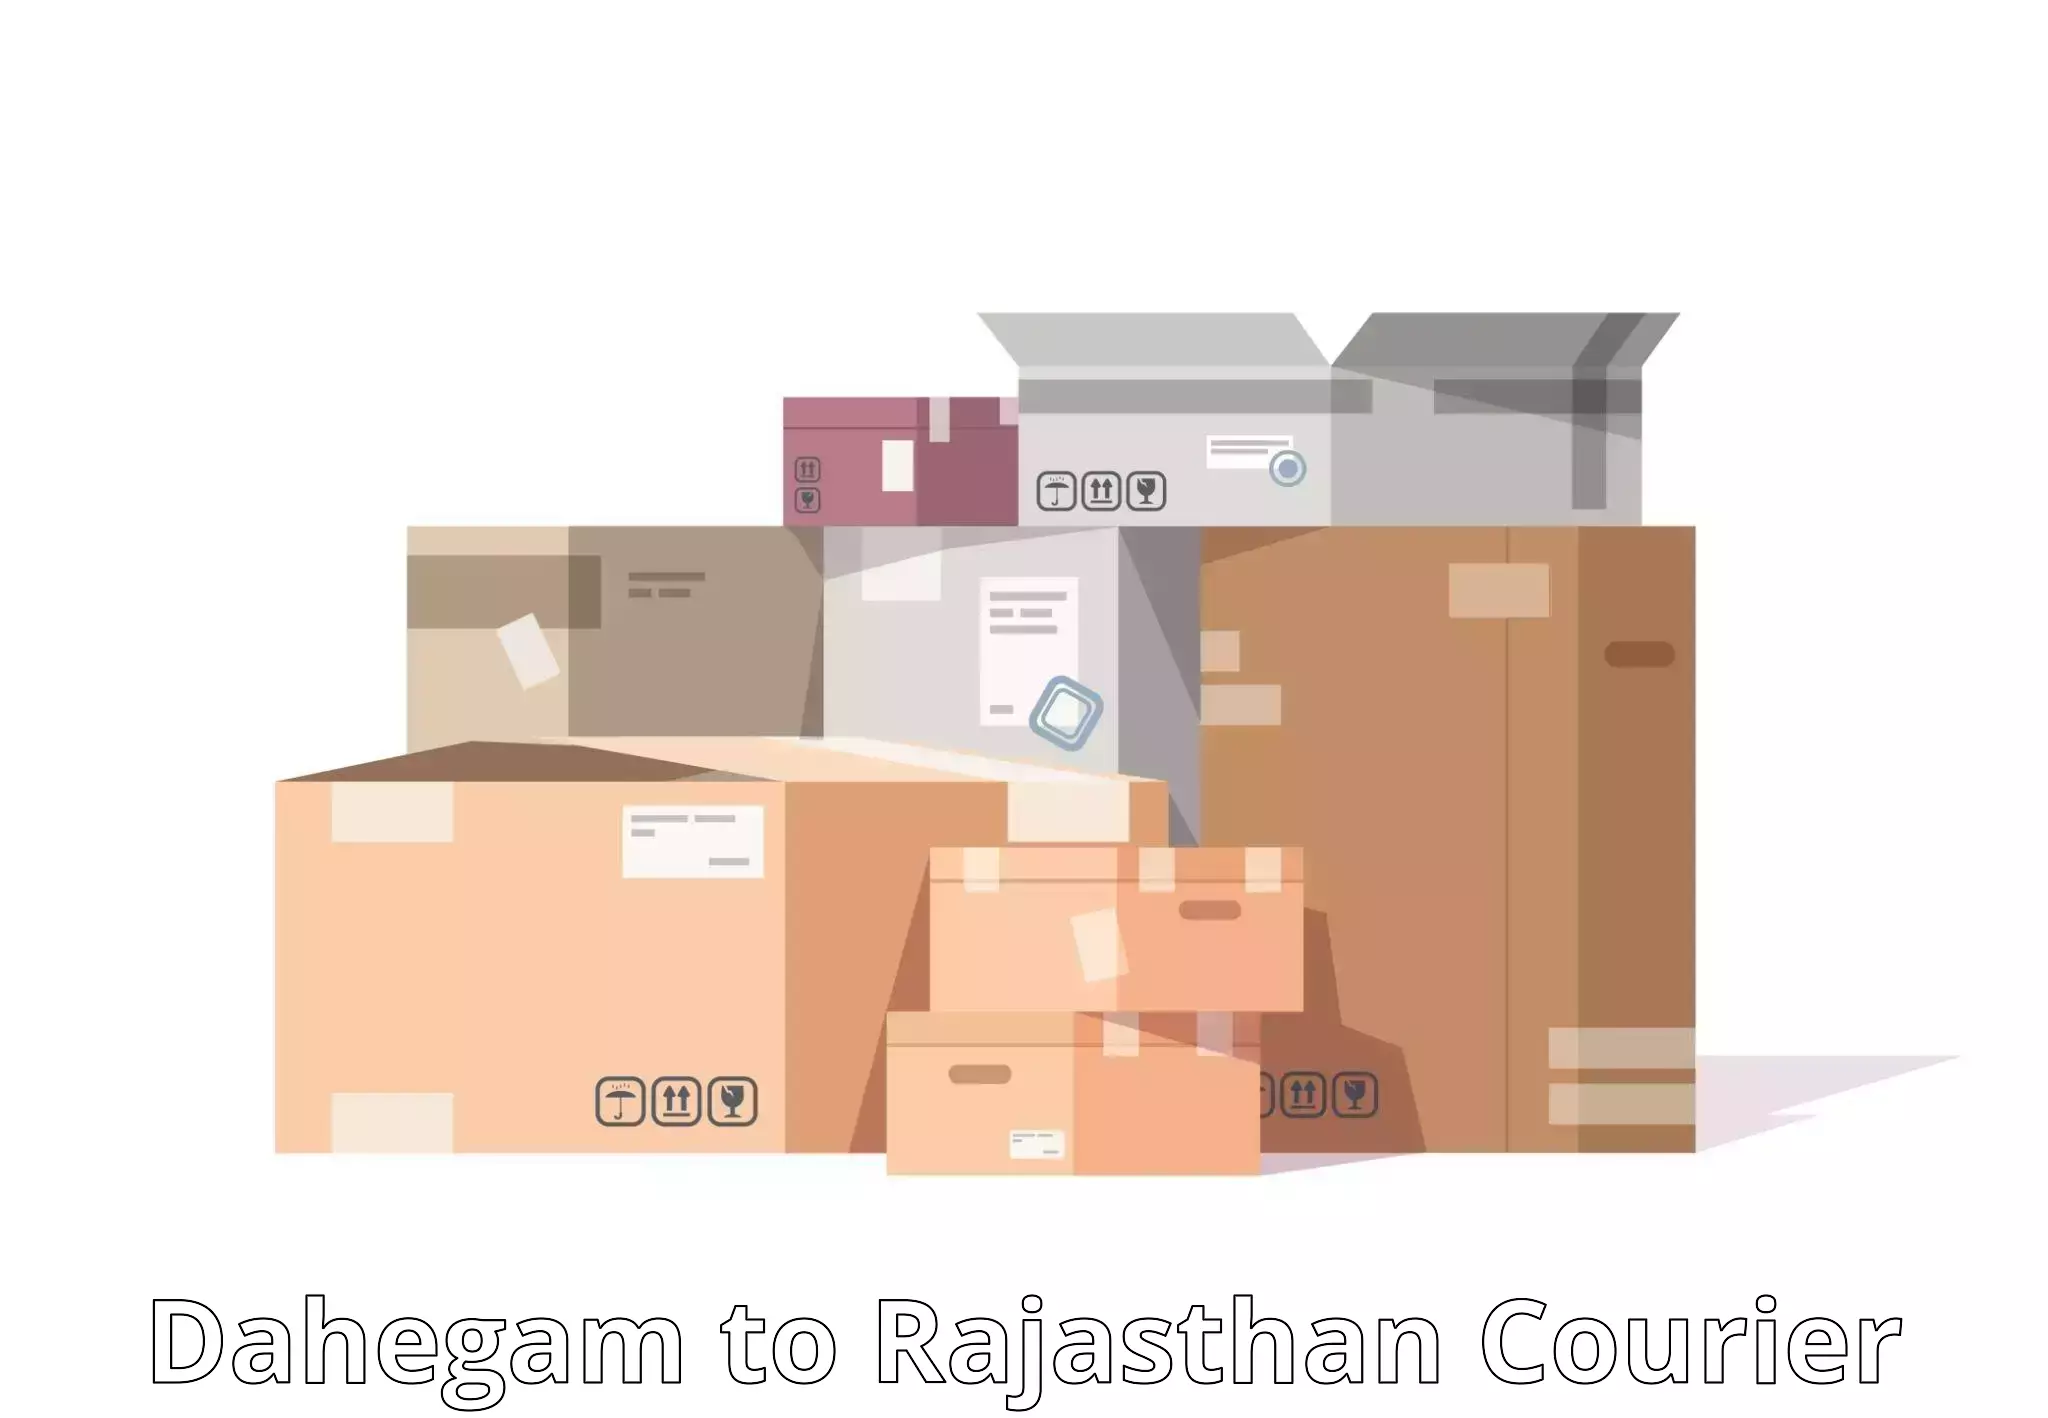 High-capacity parcel service Dahegam to Yeswanthapur